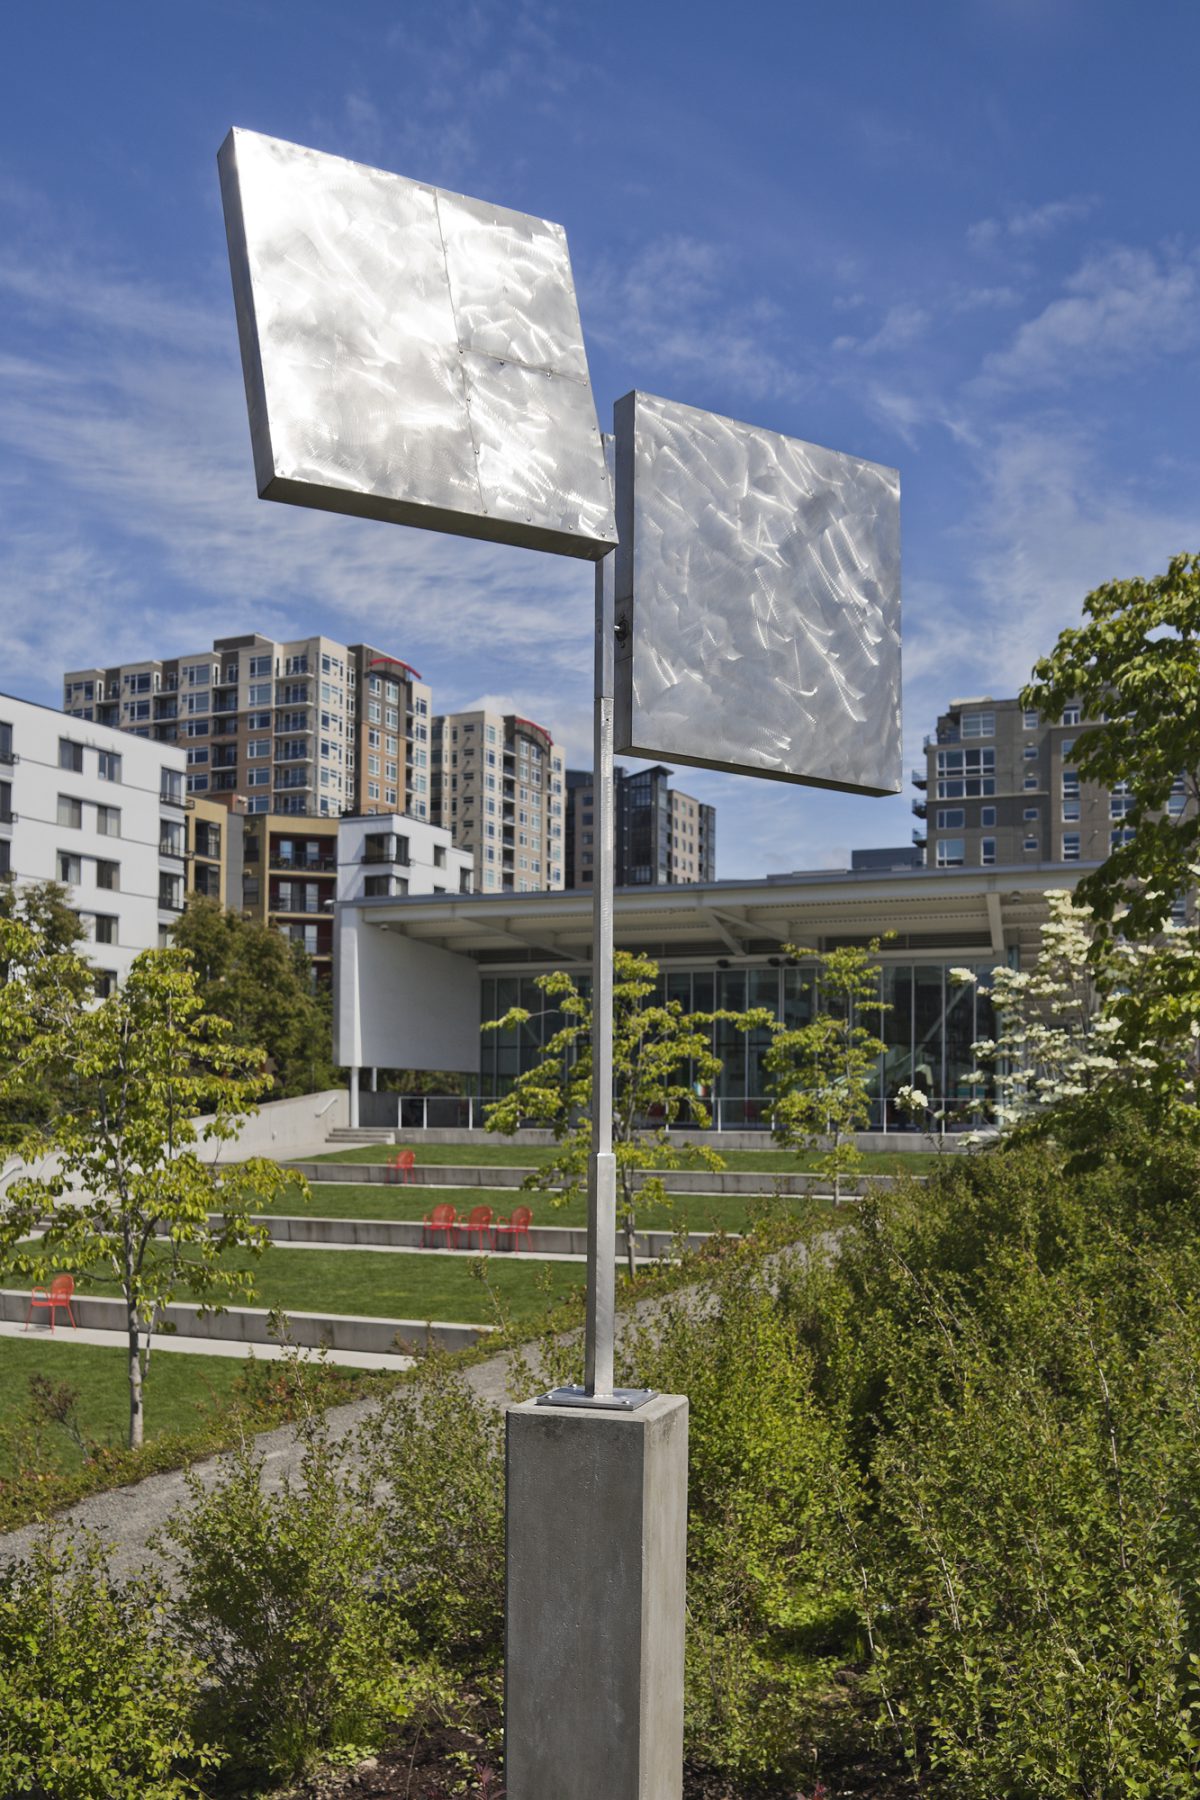 Vertical photo of a stainless steel sculpture, in the background is the Olympic Sculpture Park's Valley. A pole supports two planes that are burnished to reflect the sun's light in varying ways. The sculpture is elevated by a concrete plinth. Foliage dances along the lower half of the photo, while blue skies dotted with clouds inhabit the top.